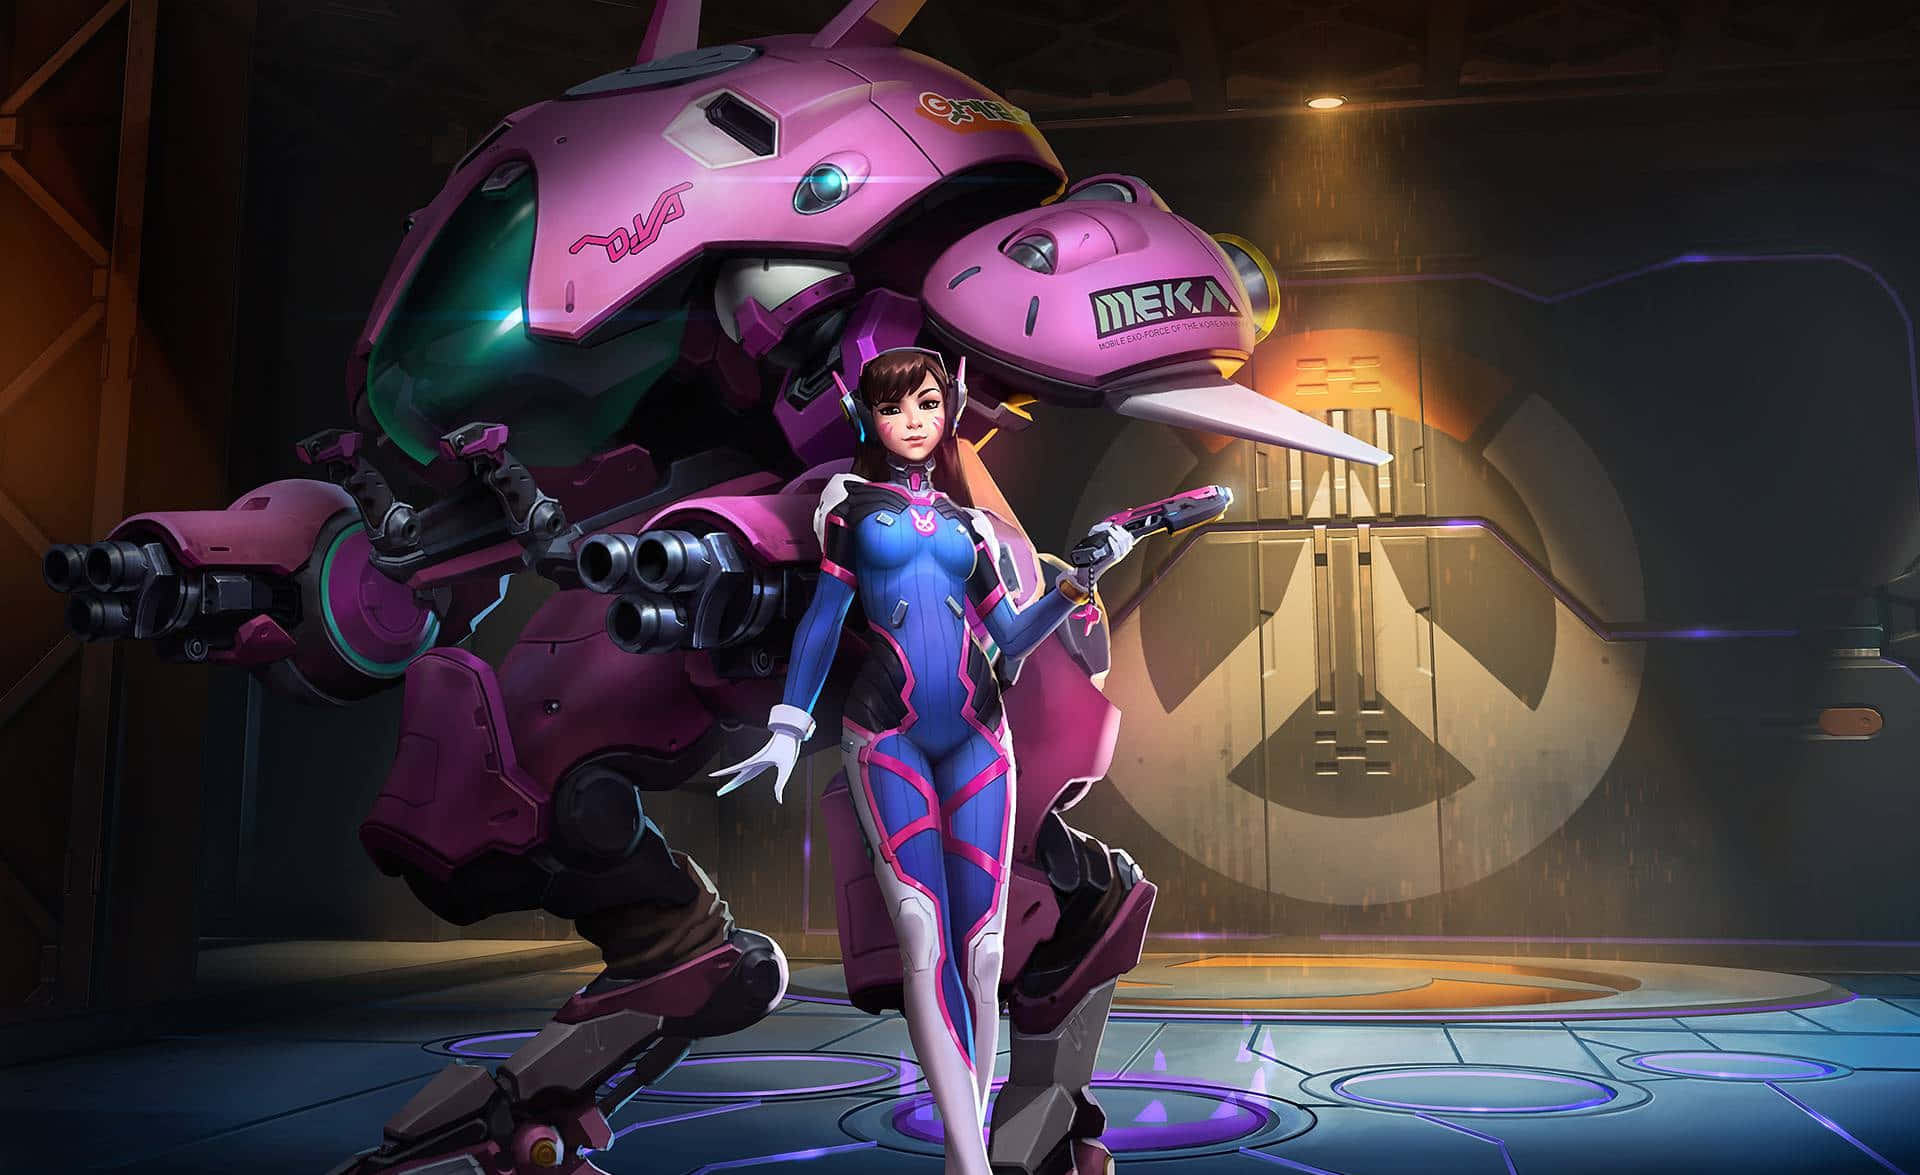 D.Va, the fierce and skilled eSports champion from Overwatch, suited up in her powerful MEKA. Wallpaper